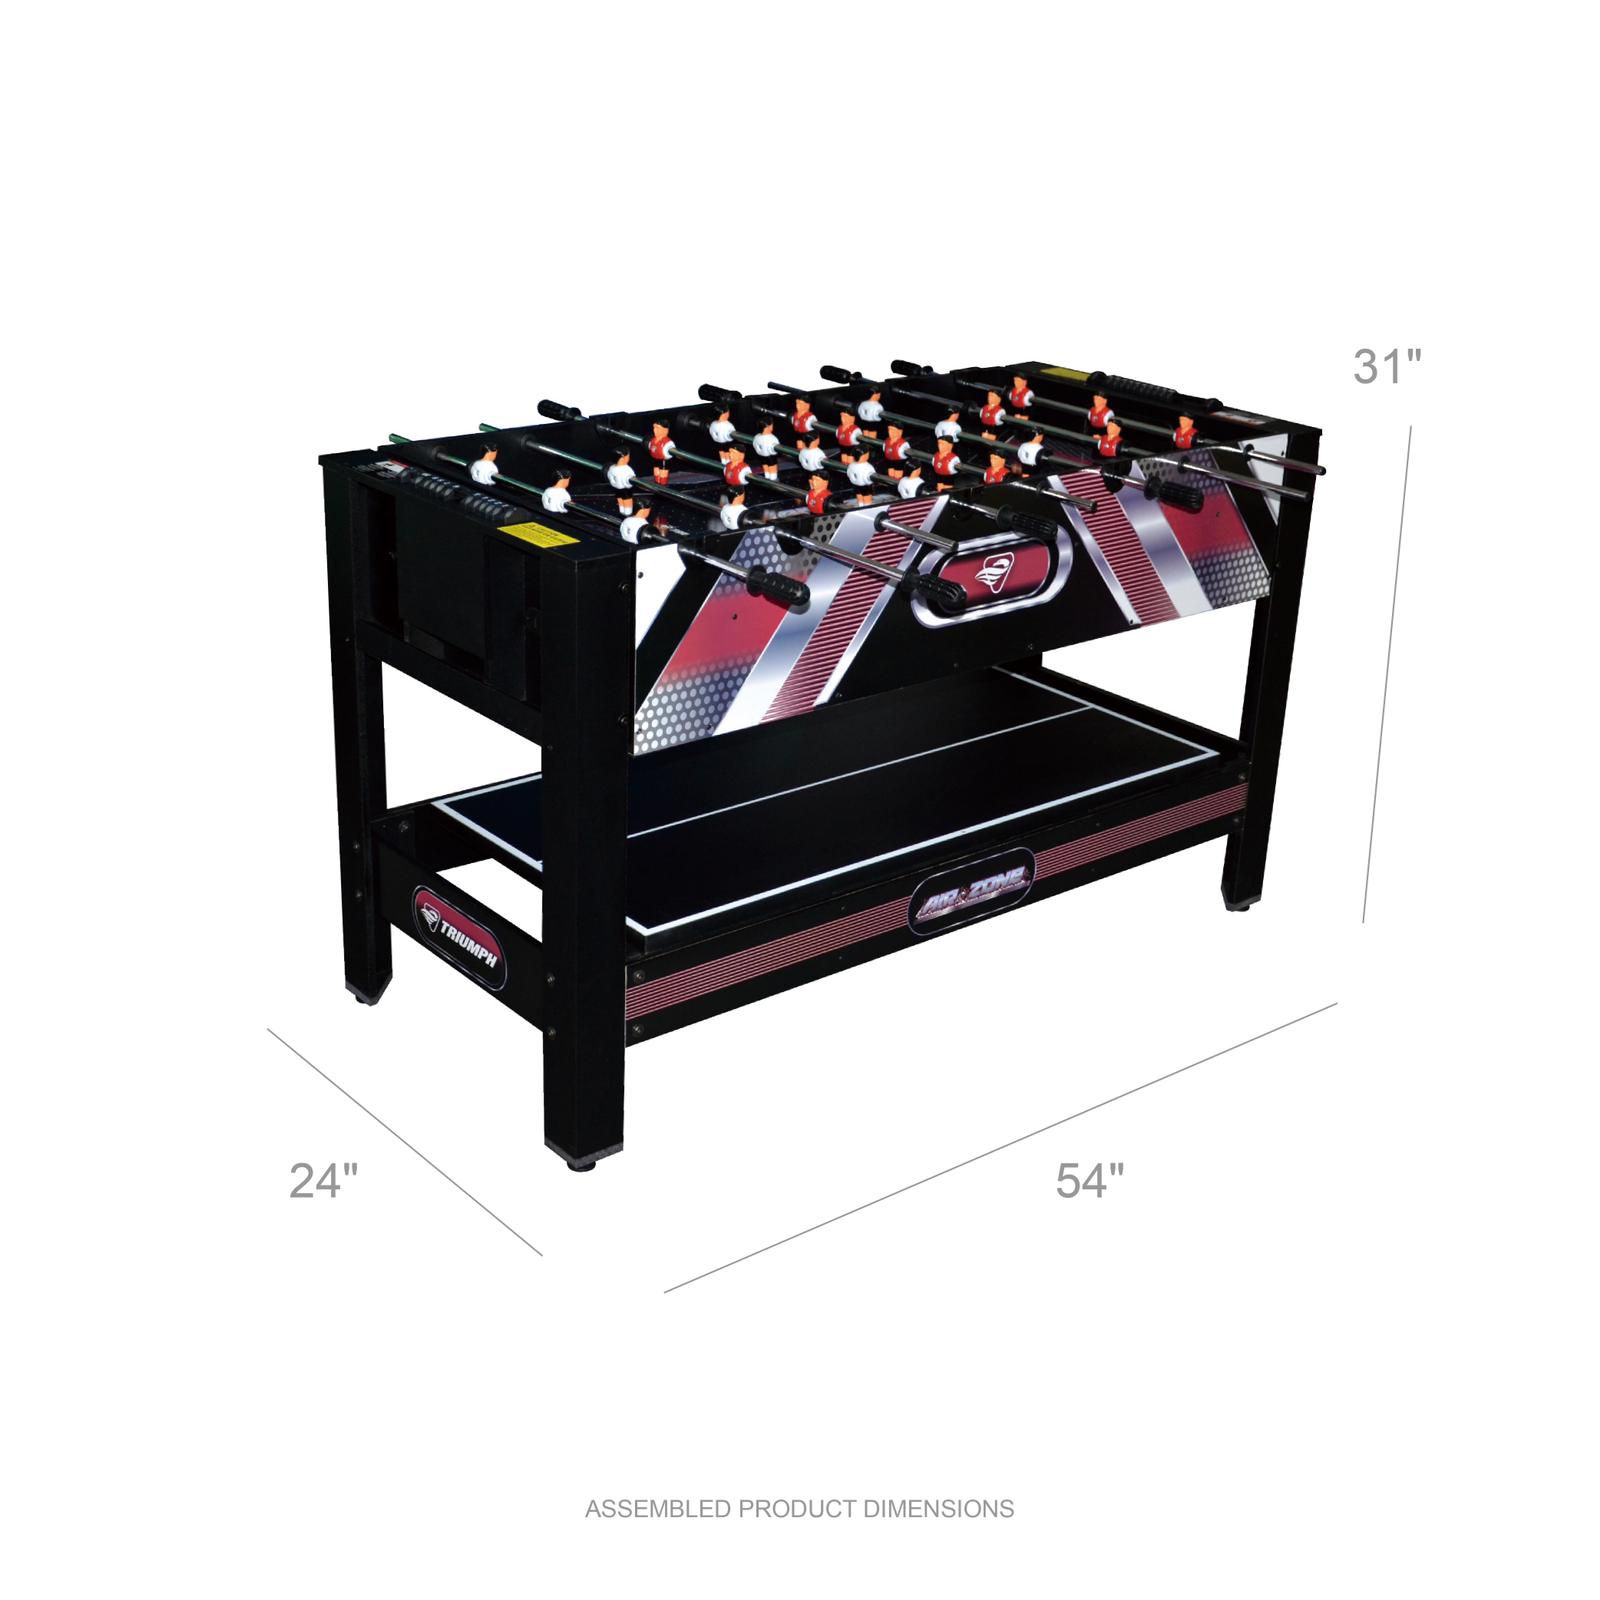 Triumph 54" 5-in-1 Air Zone Swivel Multi-Game Table Includes Billiards, Air Hockey, Foosball, Table Tennis, and Archery